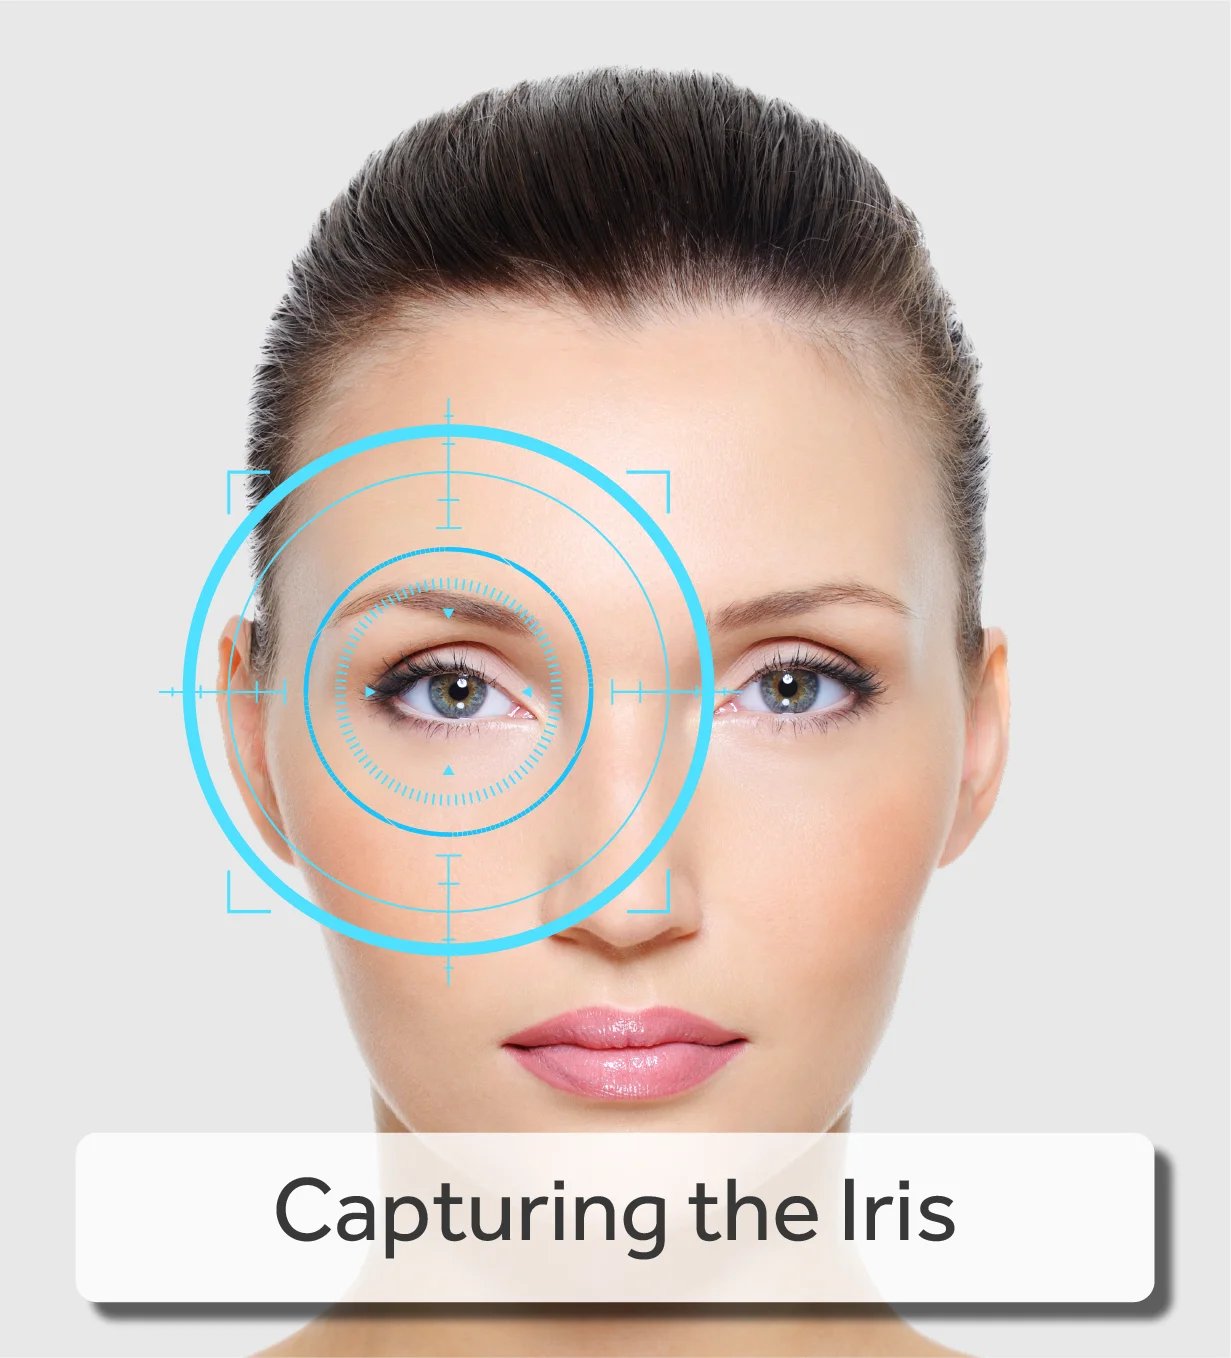 How irii recognition works